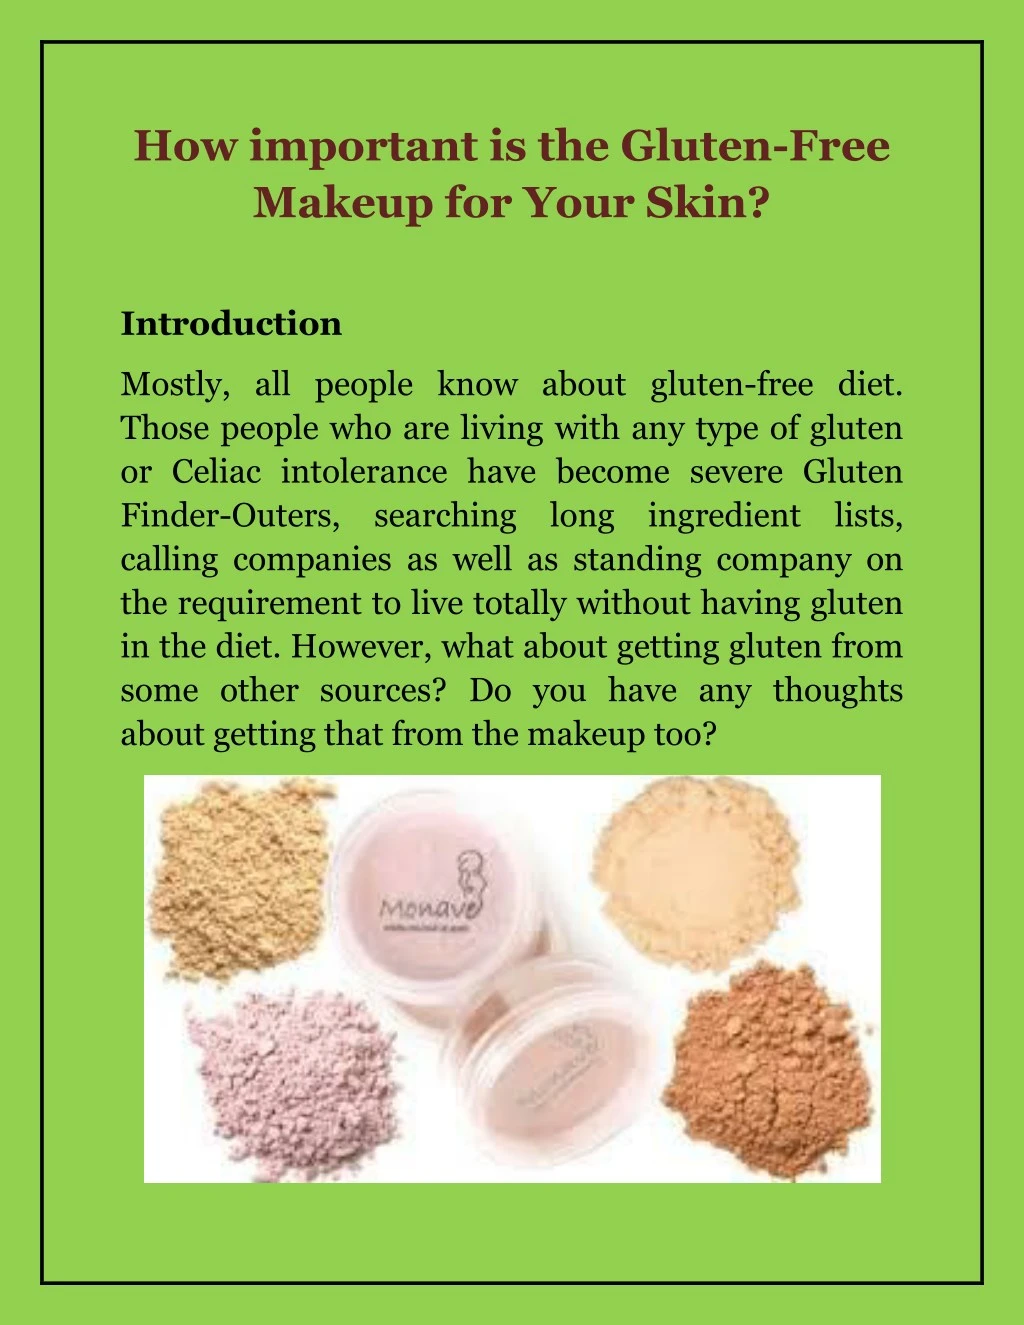 how important is the gluten free makeup for your